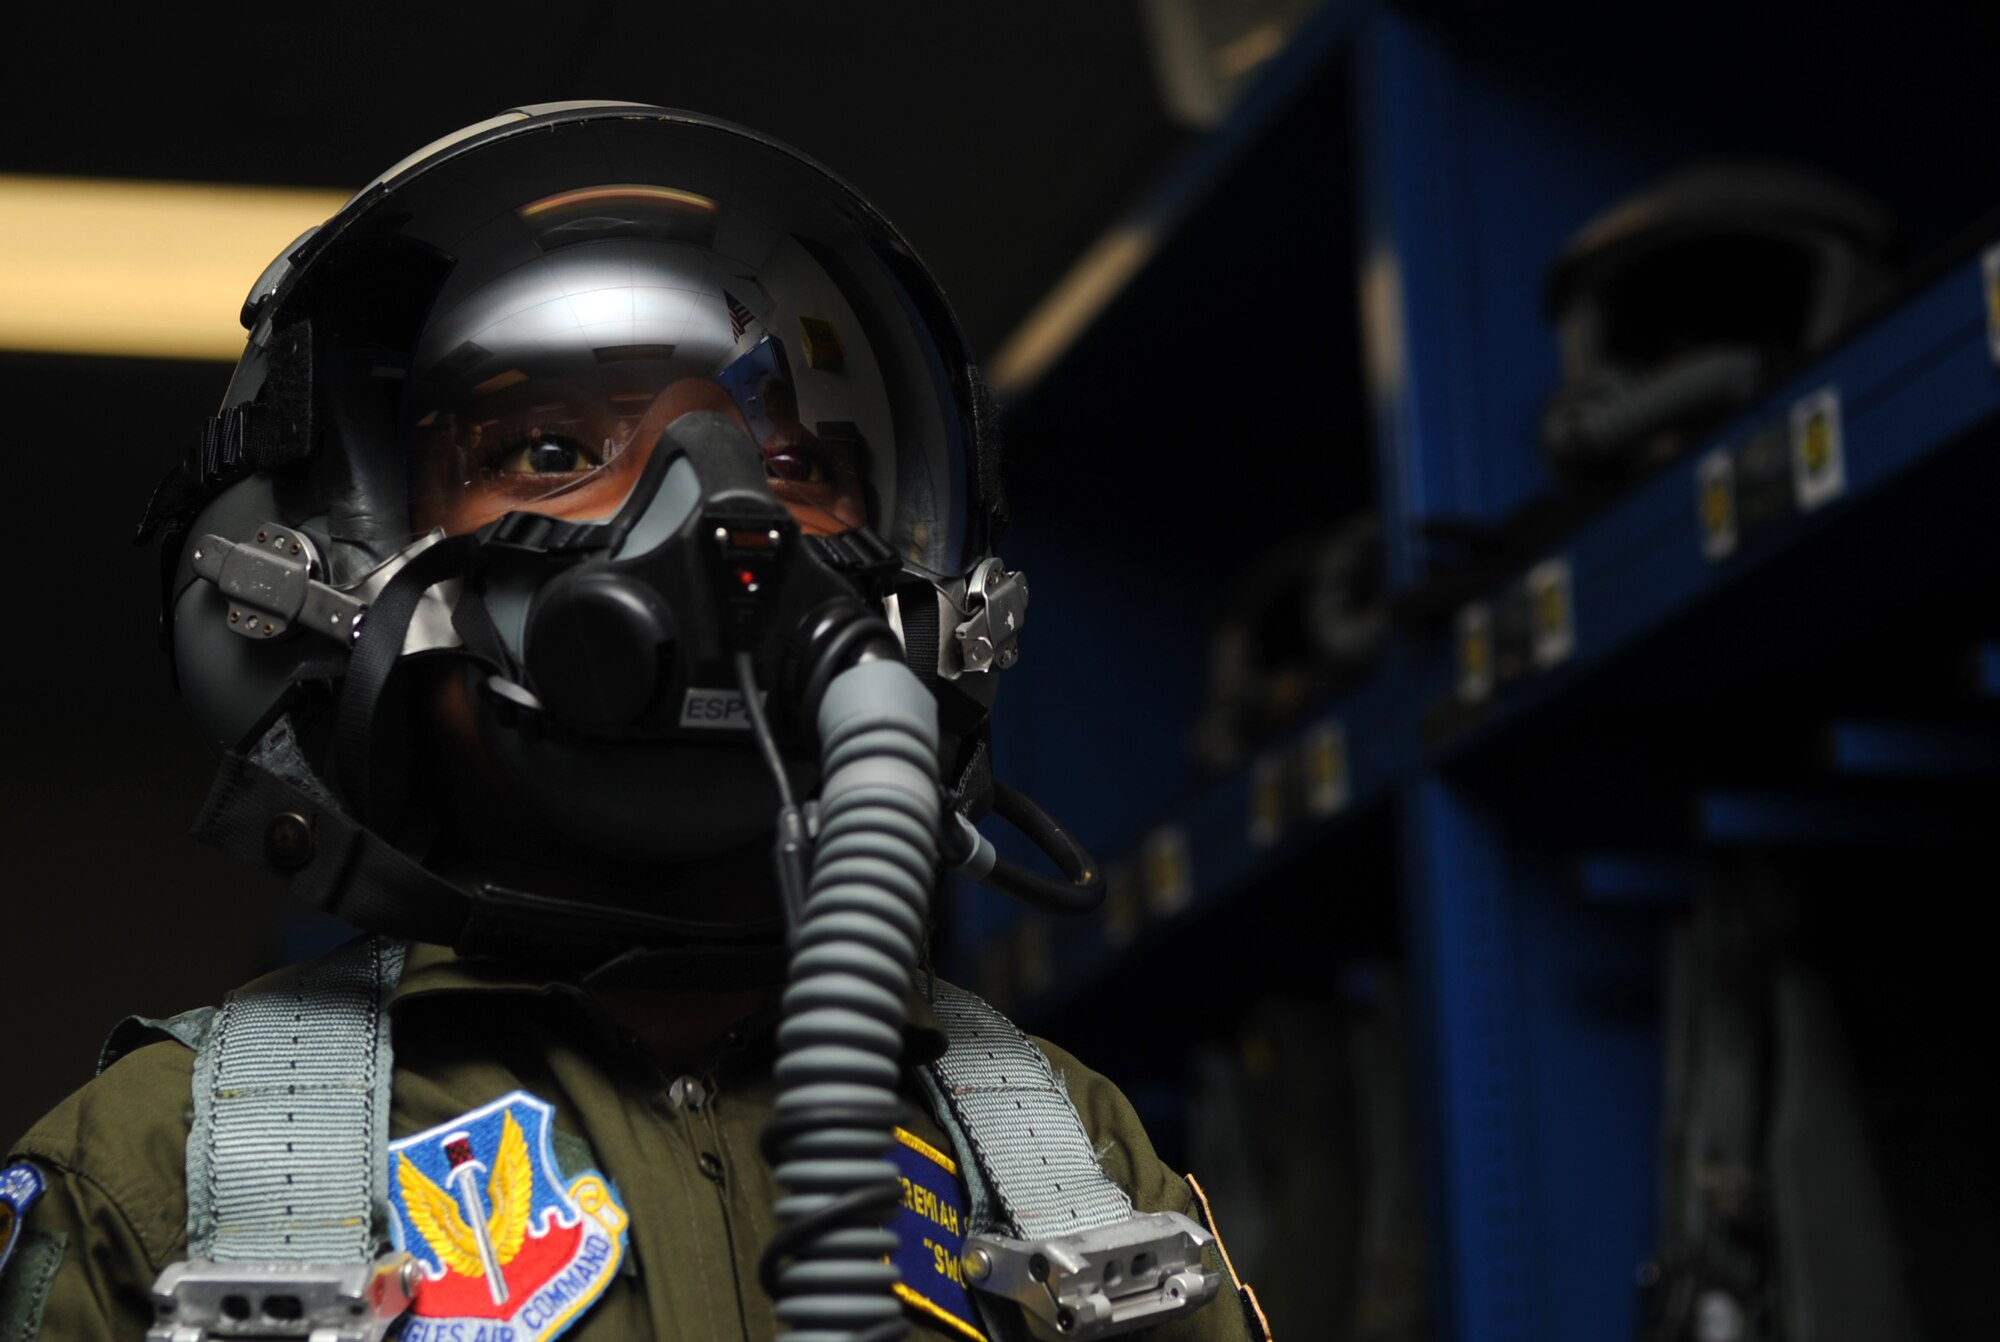 Jeremiah Seaberry, 334th Fighter Squadron pilot for a day, acclimates himself to full flight gear during a 4th Fighter Wing Pilot for a Day event, April 3, 2015, at Seymour Johnson Air Force Base, North Carolina. Jeremiah suffers from Sickle Cell Disease, a condition that results in abnormally shaped red blood cells.  (U.S. Air Force photo/Senior Airman Ashley J. Thum)